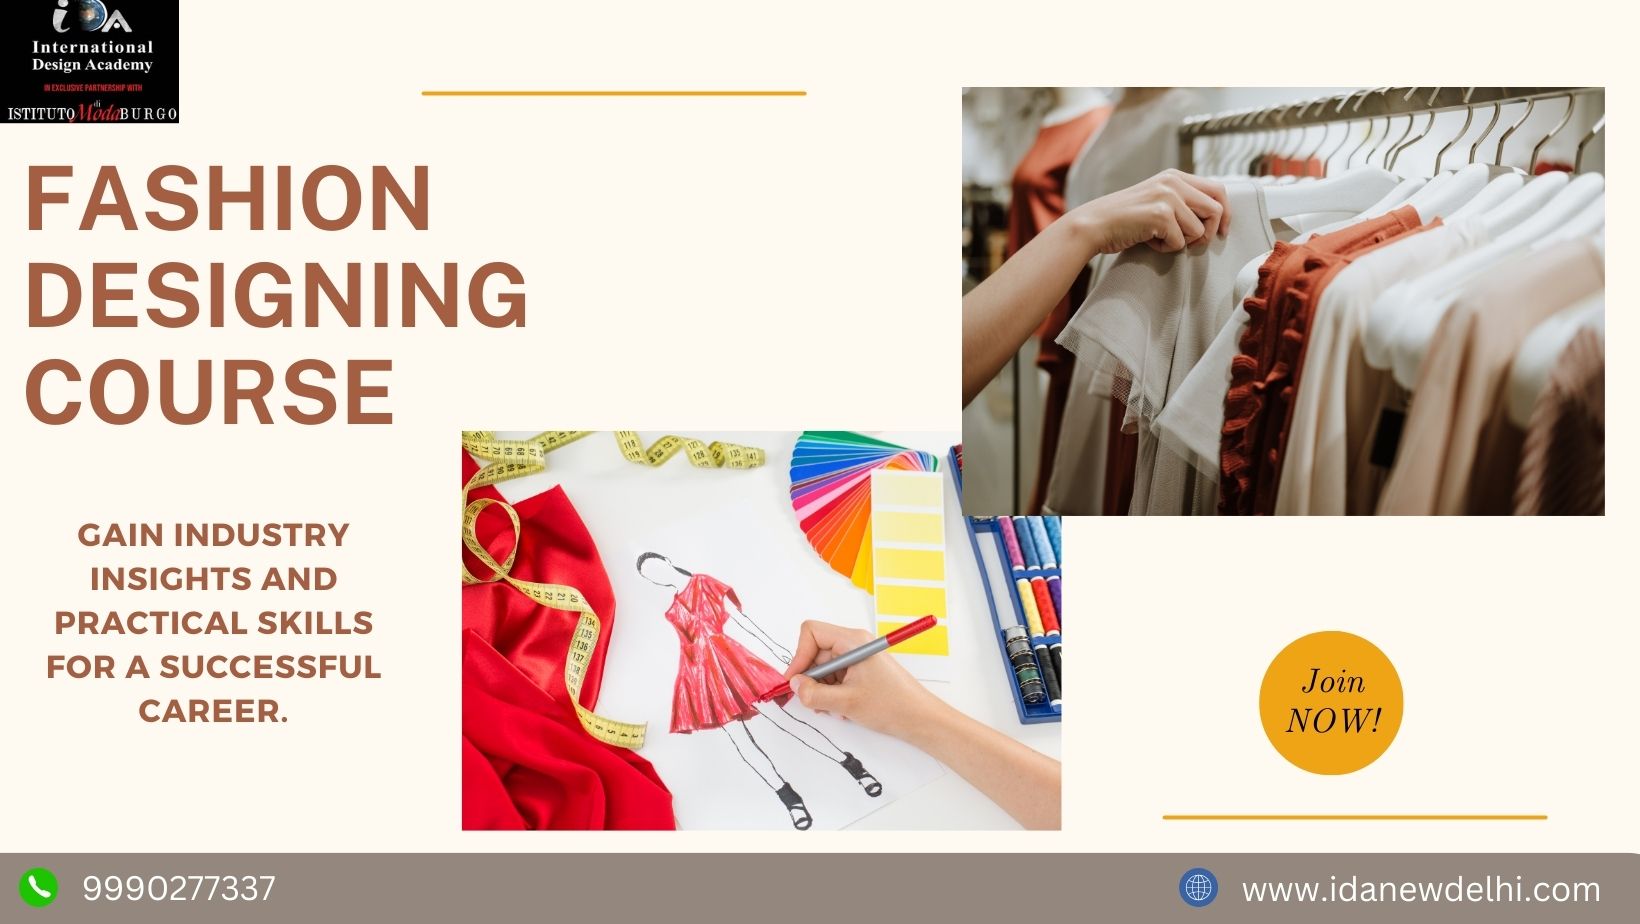  Explore the best Fashion Design courses for UG, PG, and Diploma programs in Delhi